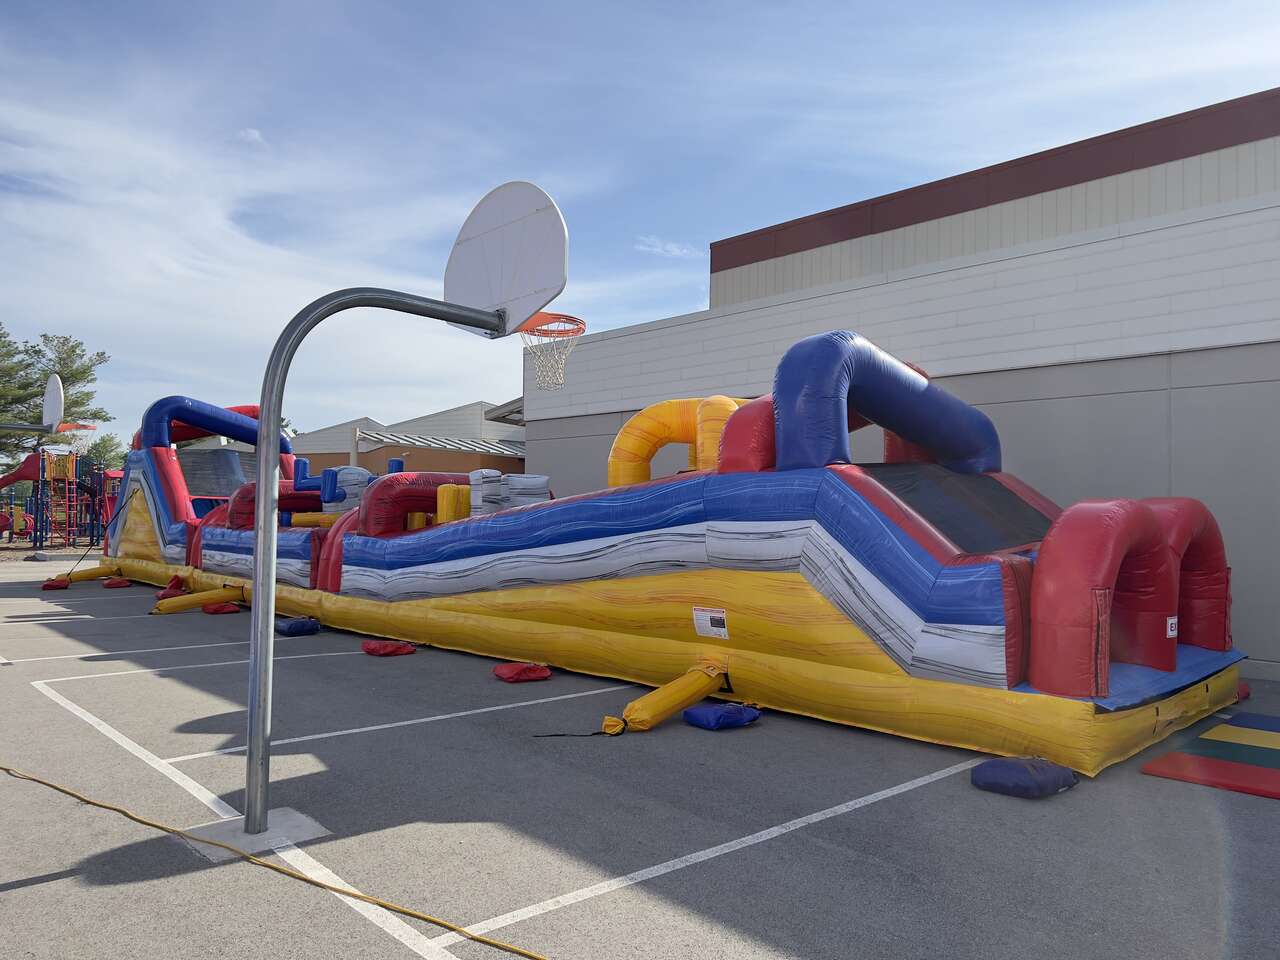 obstacles courses rental, from Fun Bounces Rental in Marseilles IL 61341